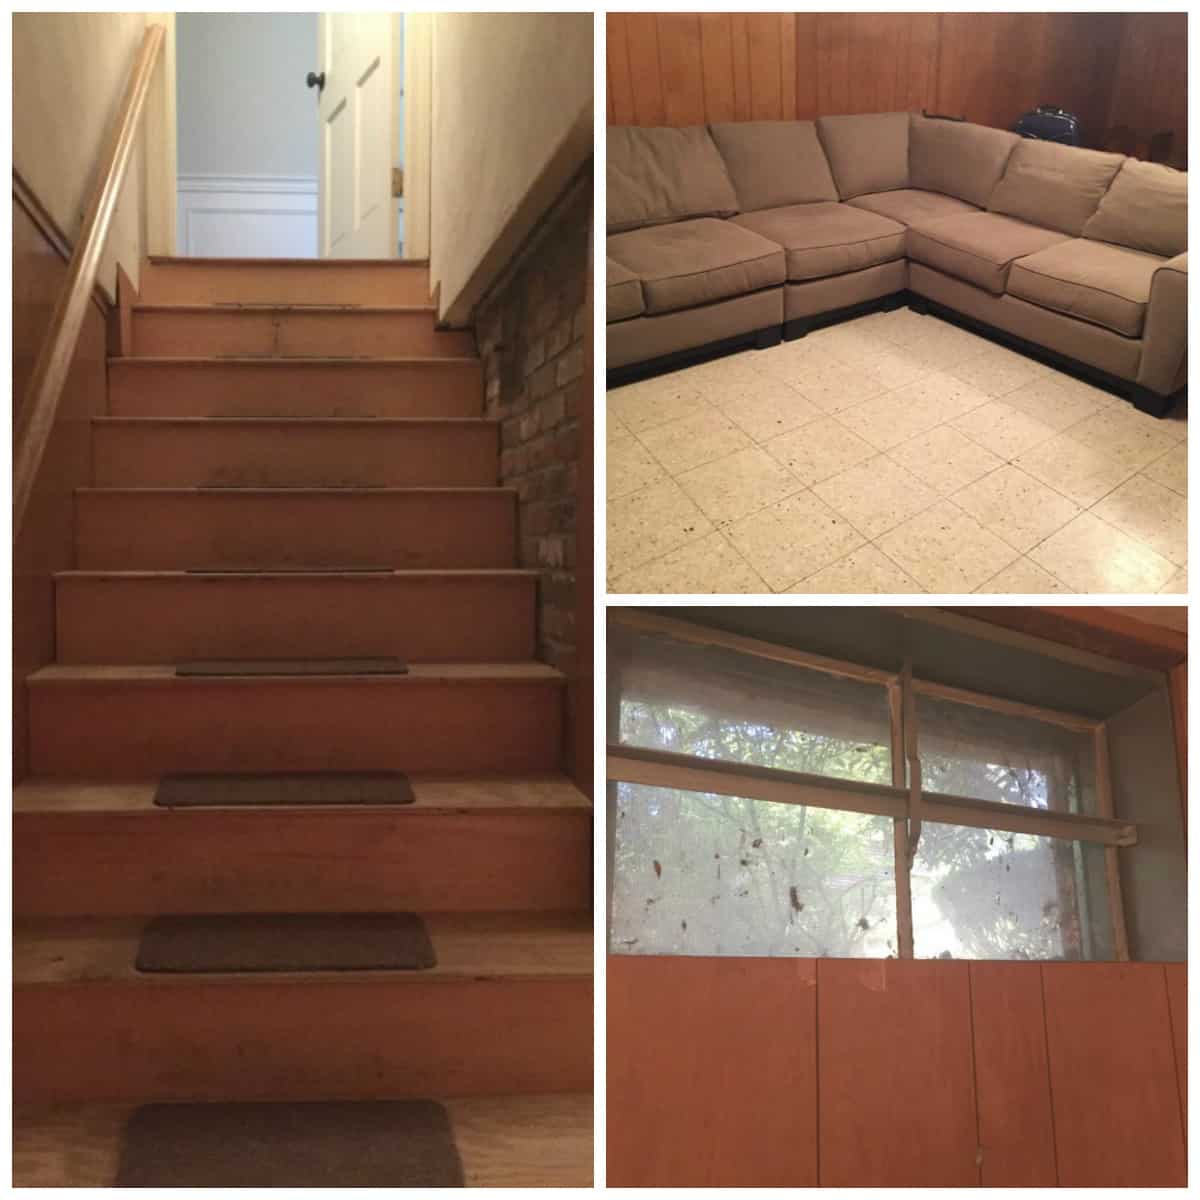 A trio of photos showing the bare, unpainted wooden steps of a basement, a plain couch on tile floor and a window with leaves stuck on the panes 